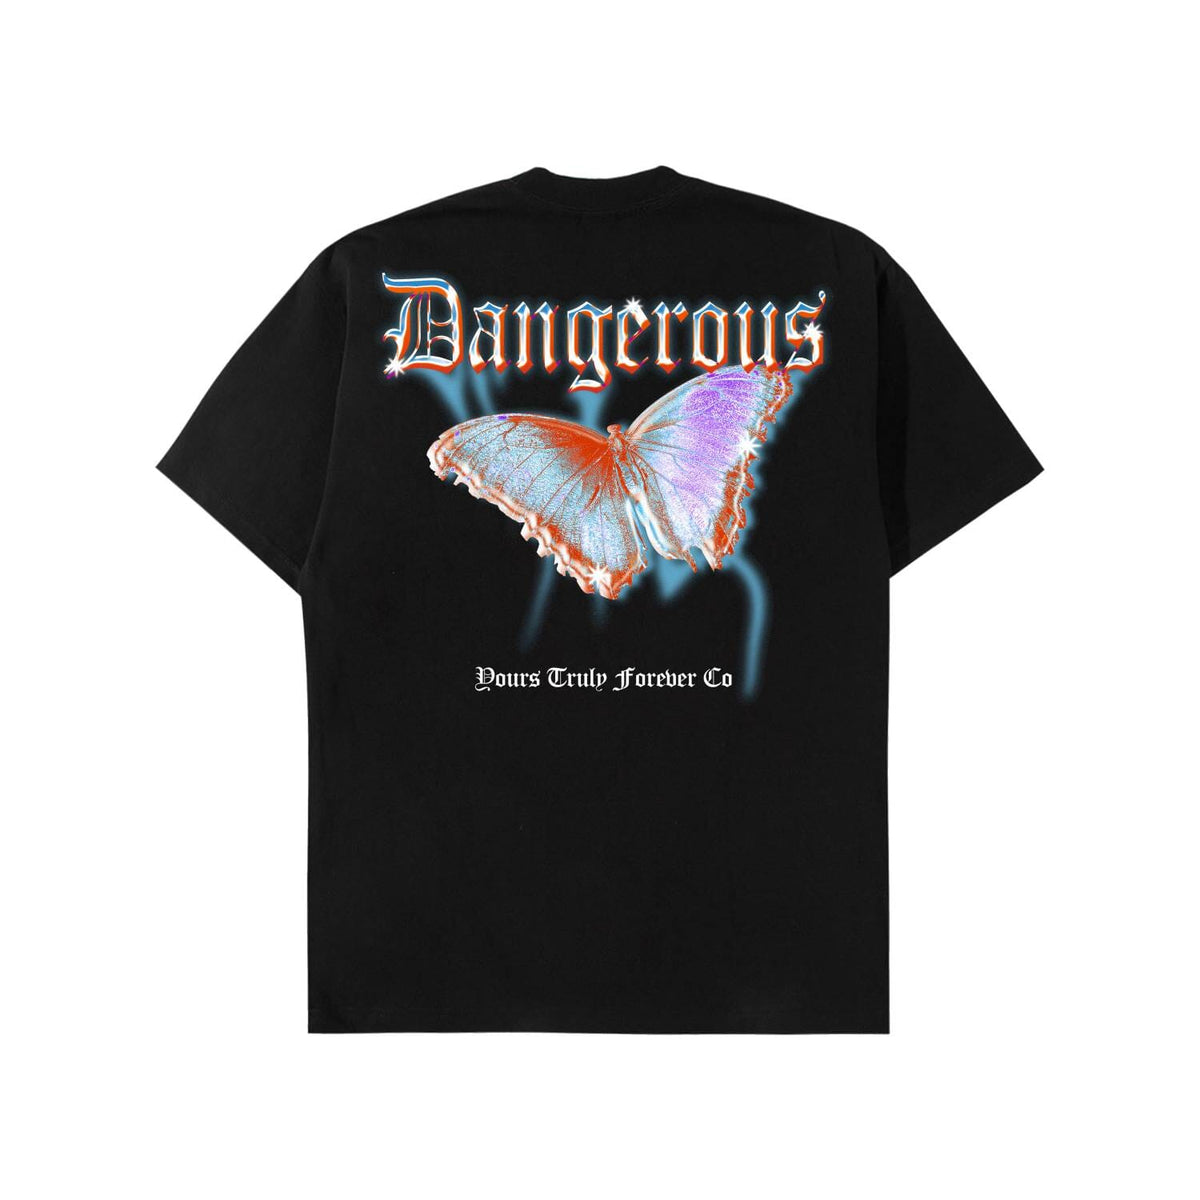 DANGER TEE - BLACK SHIRT Yours Truly Clothing